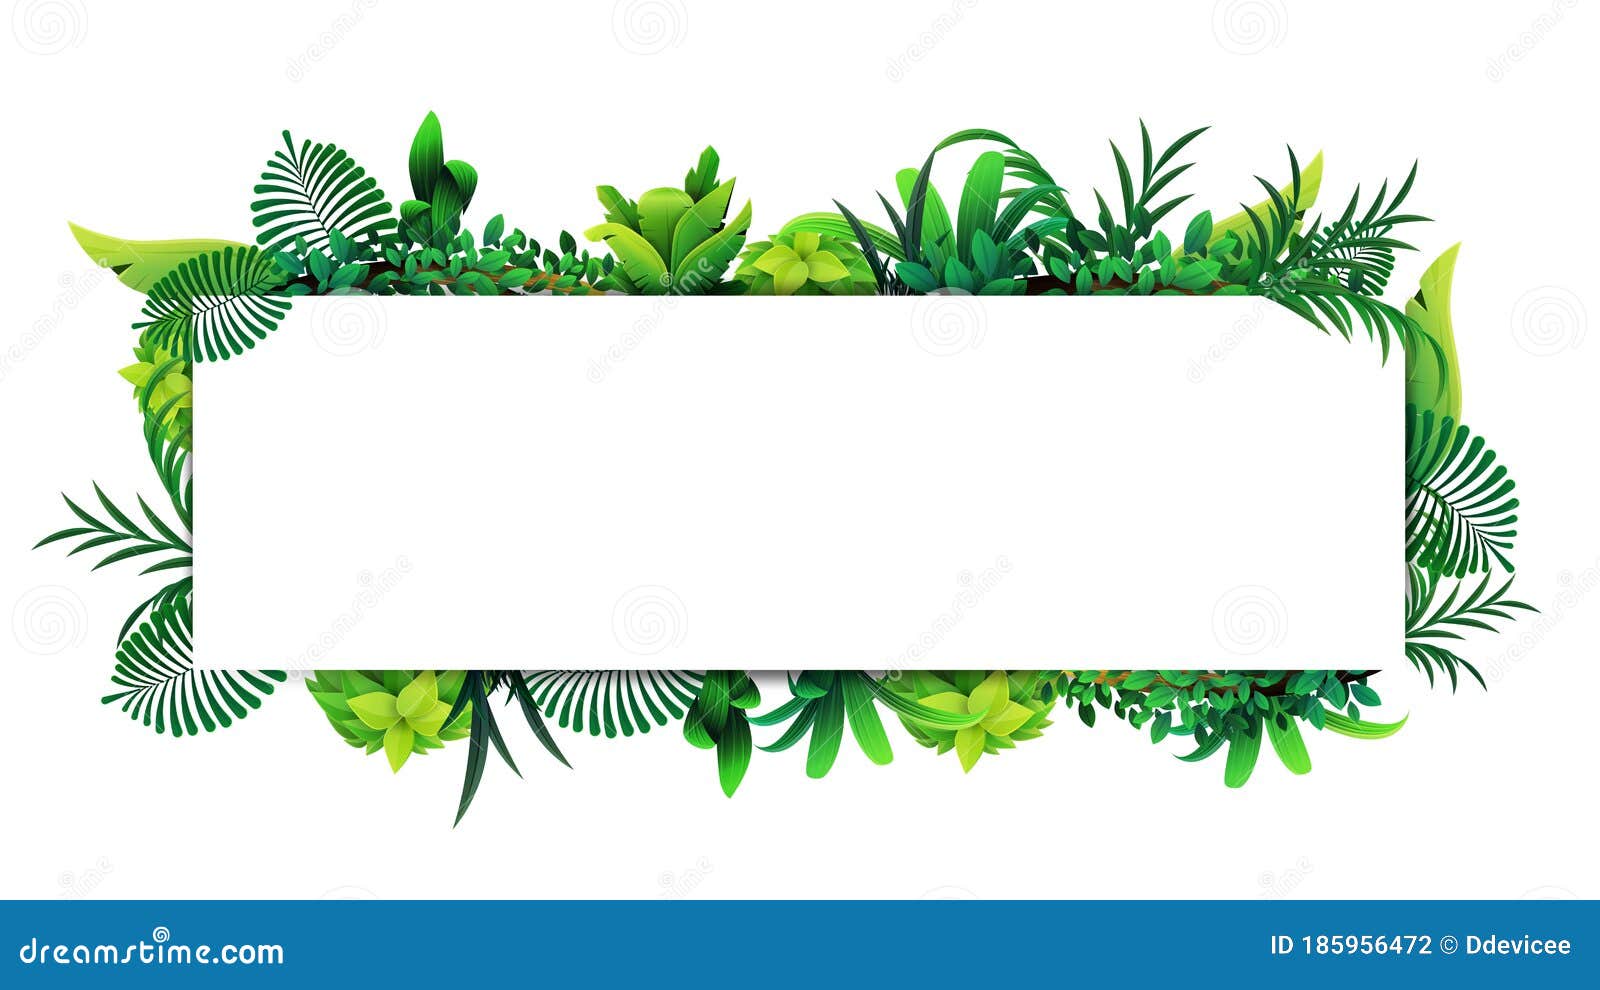 horizontal frame of tropical leaves around a white empty rectangle.